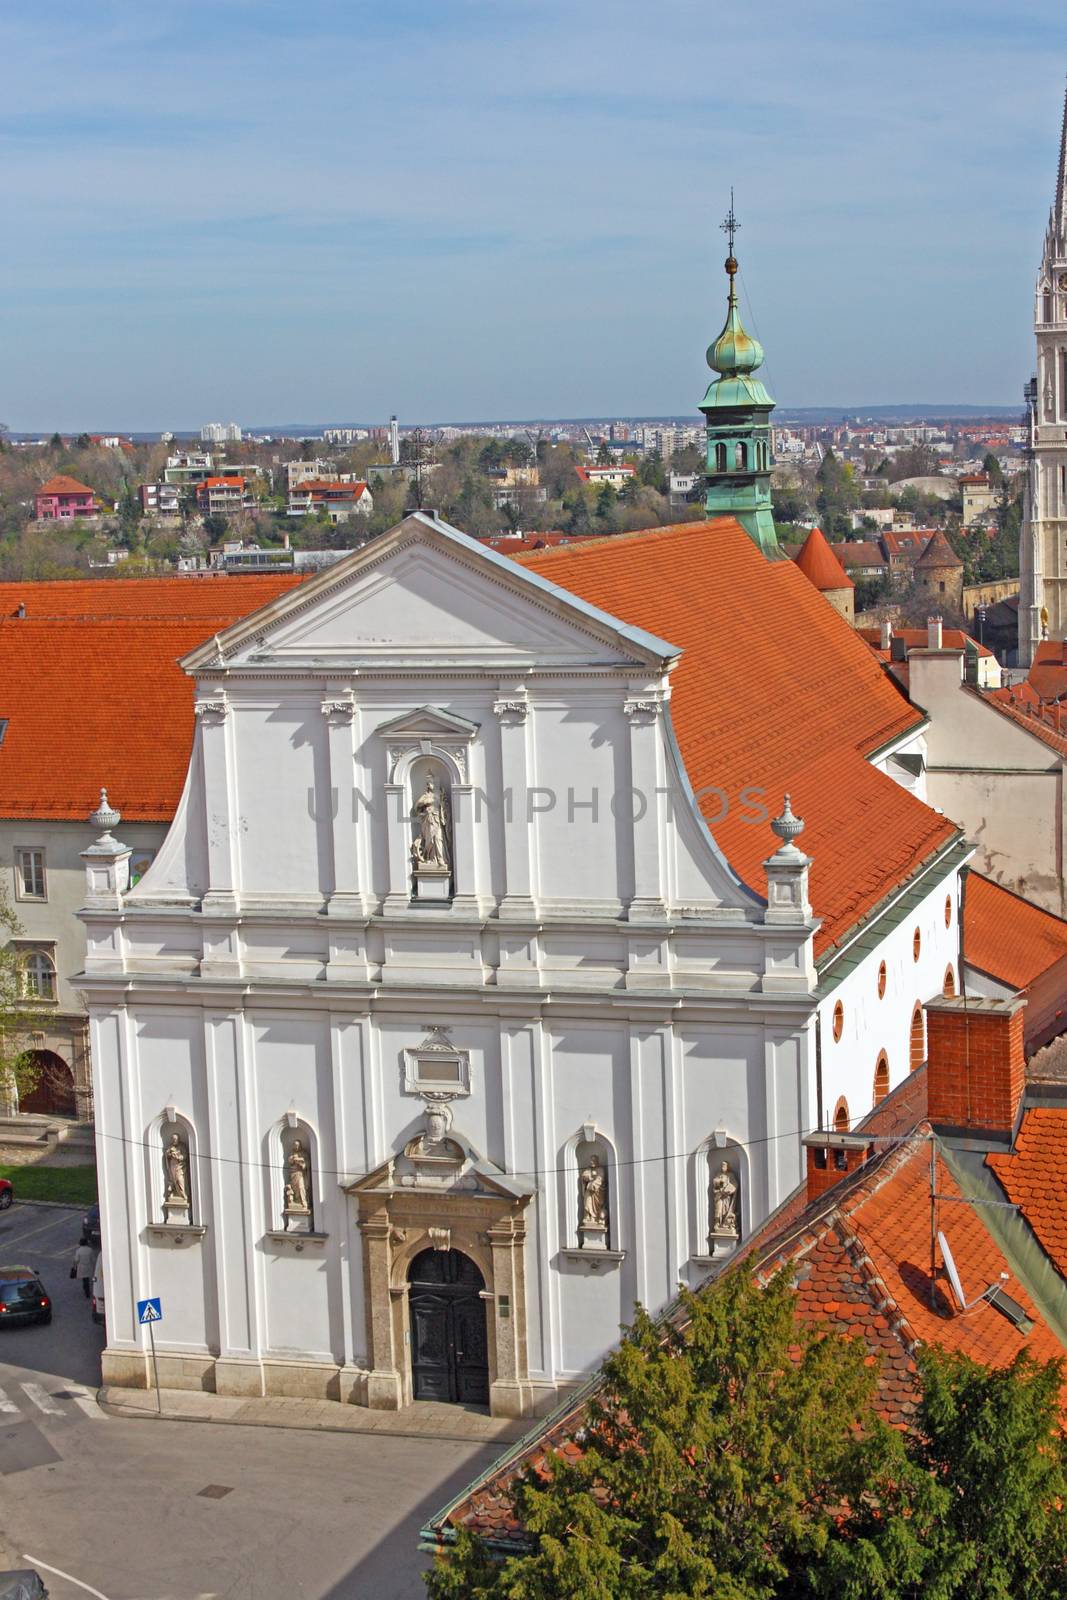 Church of St. Catherine is a Baroque style church in Zagreb, Croatia